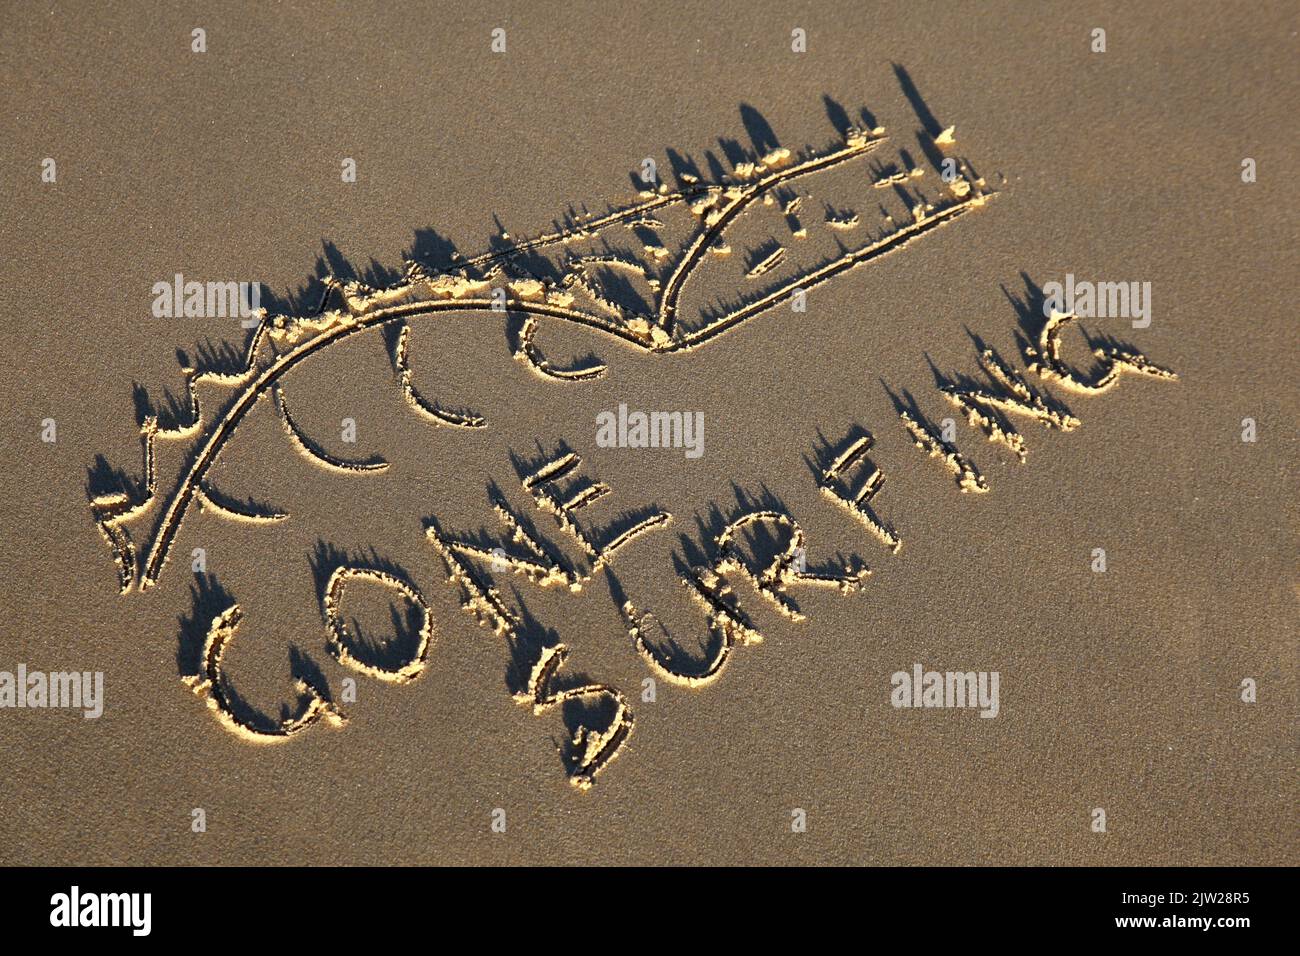 Gone surfing and wave drawn in the sand. Summer beach concept Stock Photo